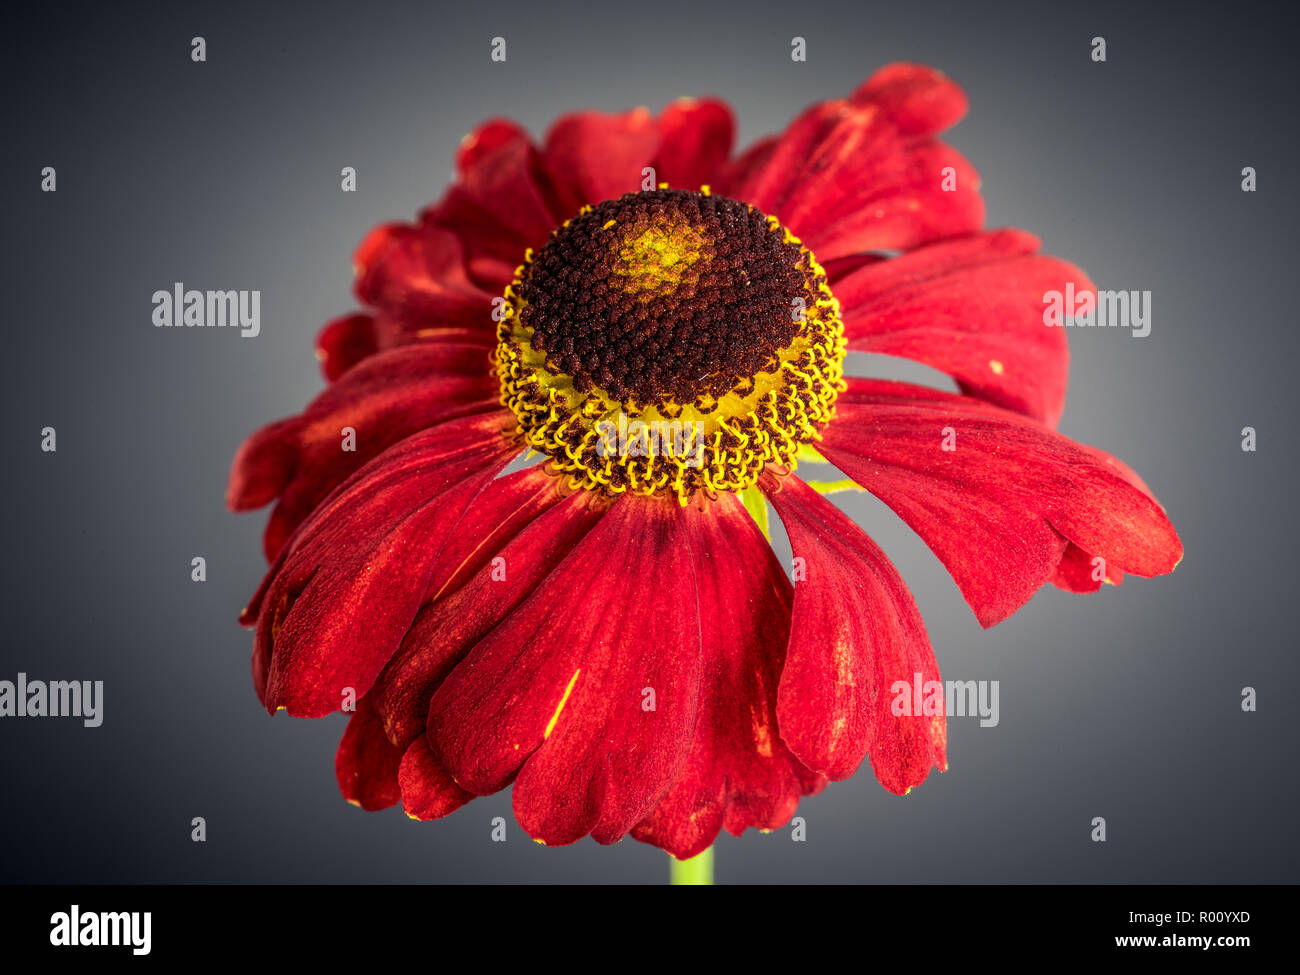 Still life fine art floral colorful macro of a single isolated wide open yellow red helenium / bride of the sun blossom in vintage painting style Stock Photo